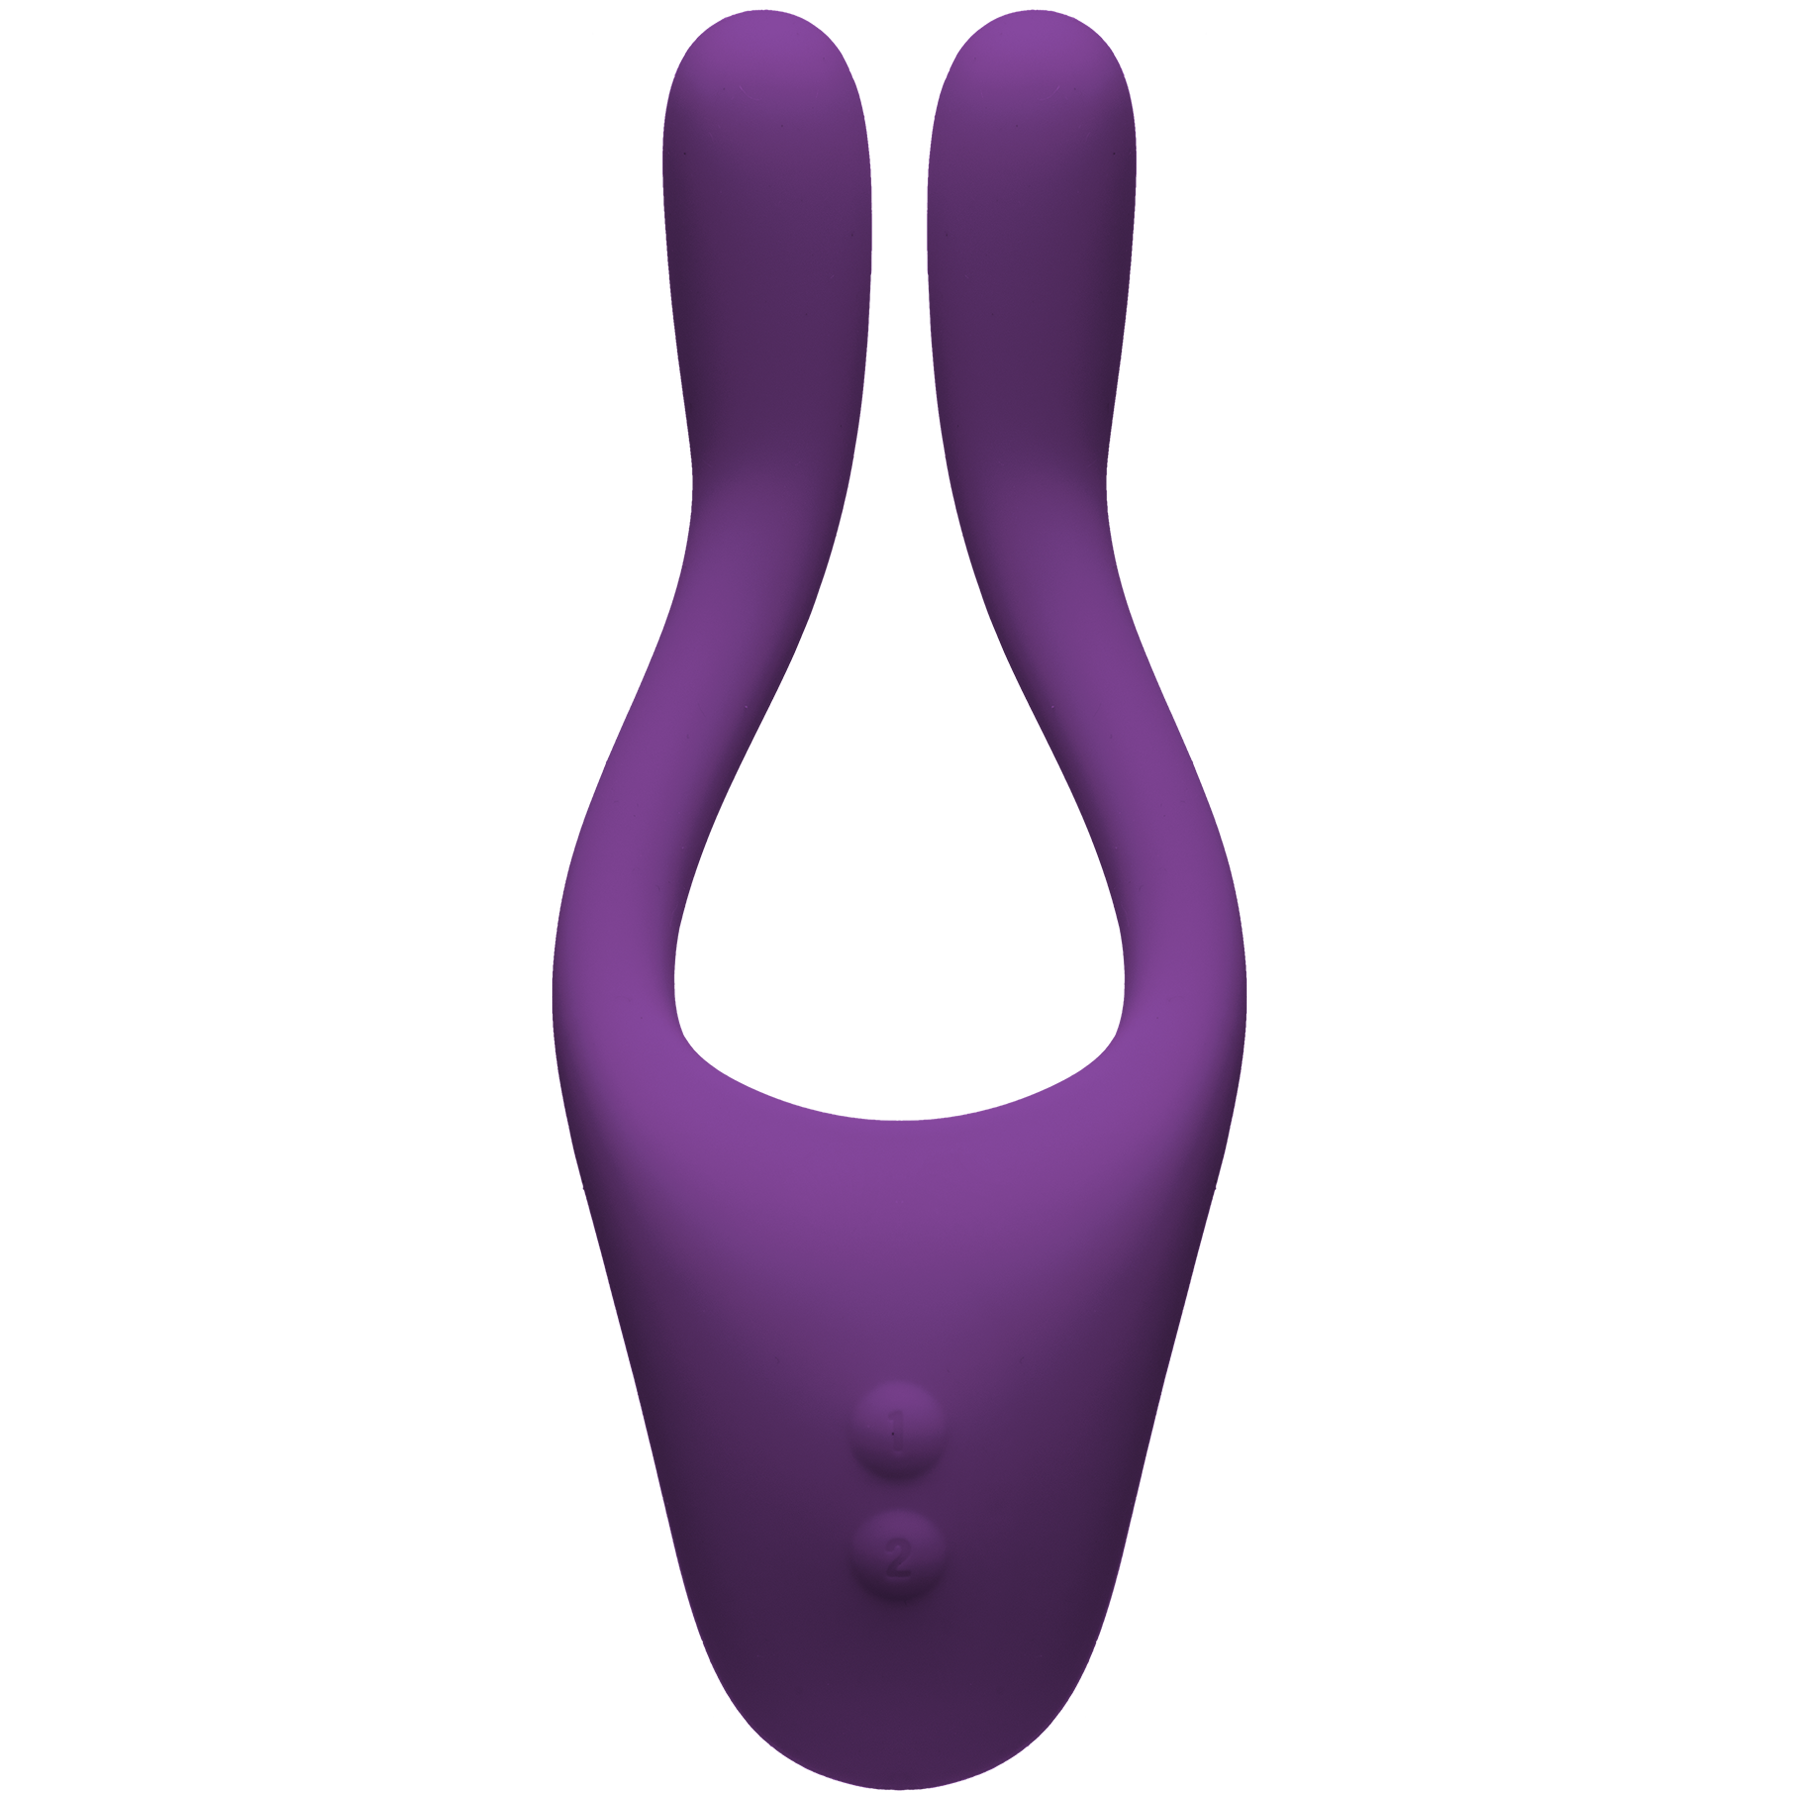 TRYST - v2 Bendable Multi Erogenous Zone Massager with Remote